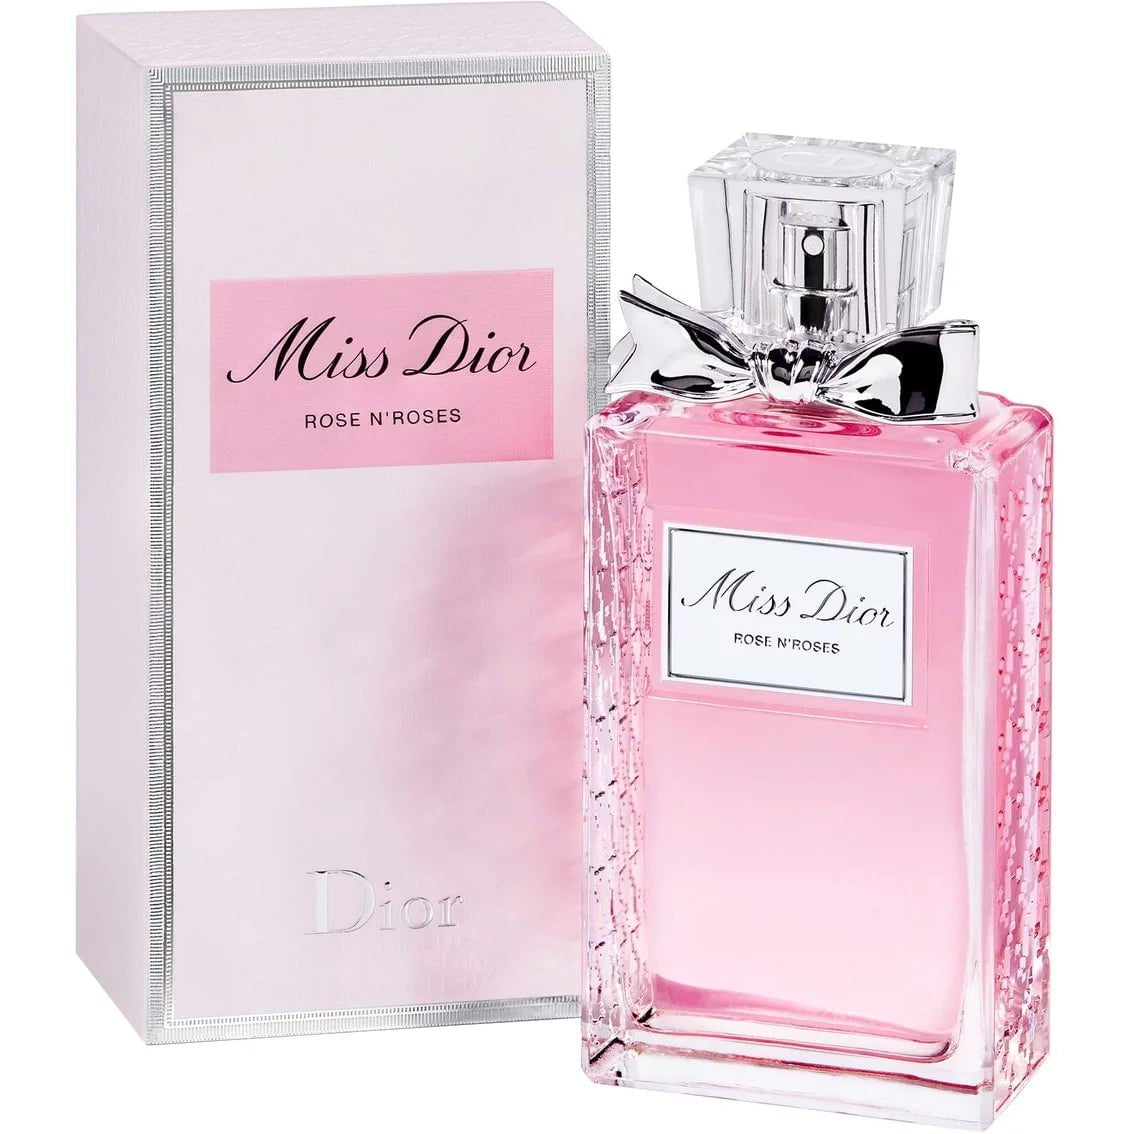 Miss Dior Rose N' Roses Eau De Toilette Spray for Women by Dior, Product image 1